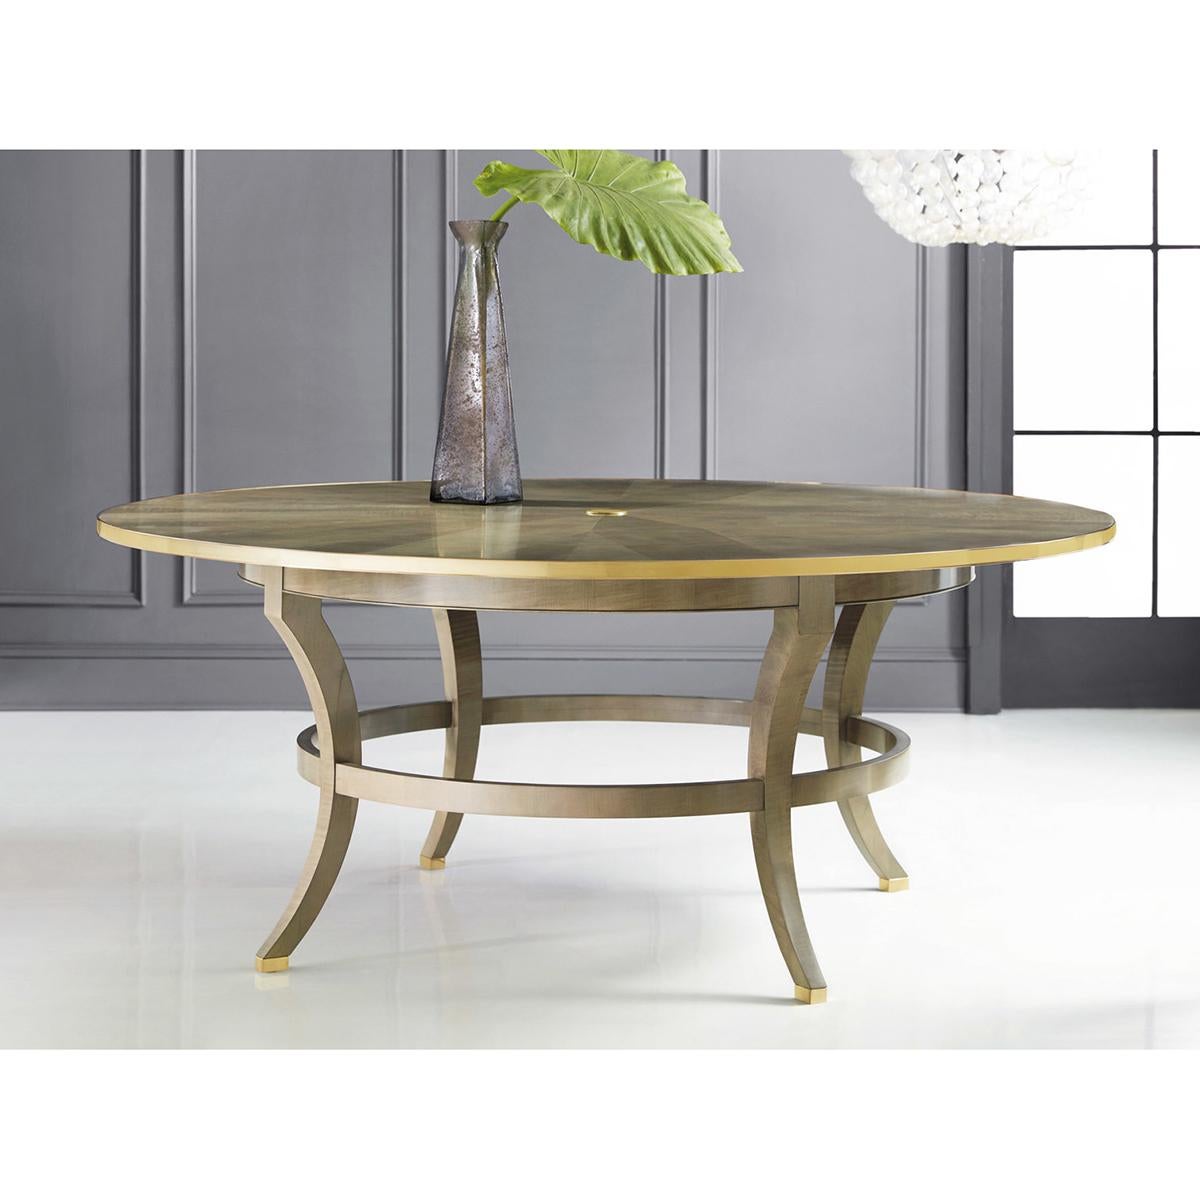 Vietnamese Art Deco Round Dining Table, Sycamore For Sale